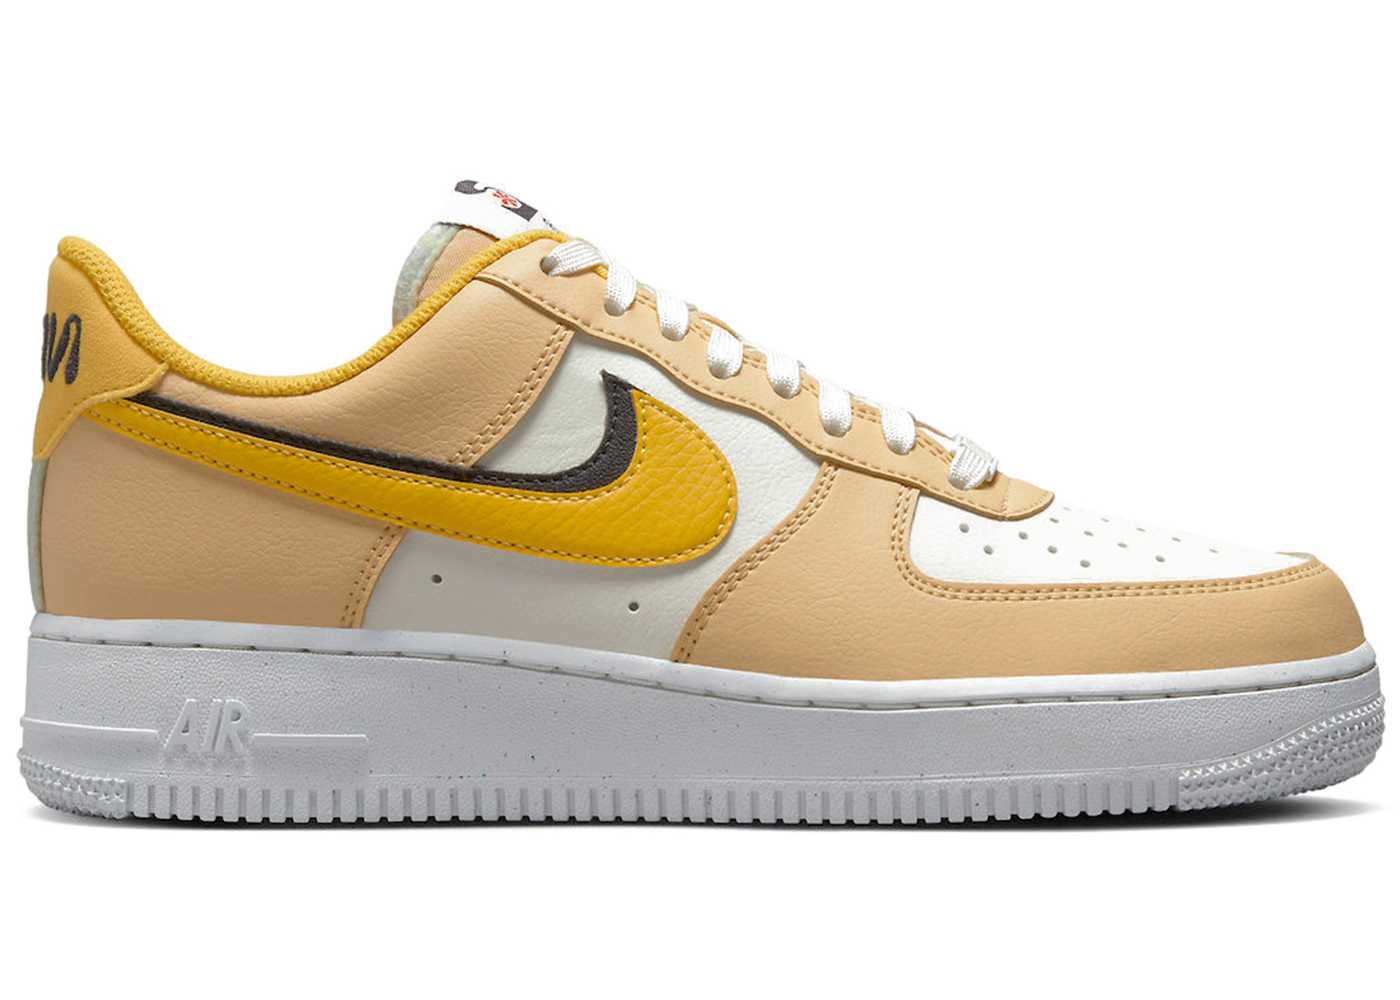 Nike Air Force 1 Low '07 LX '82 Double Swoosh Sail Yellow